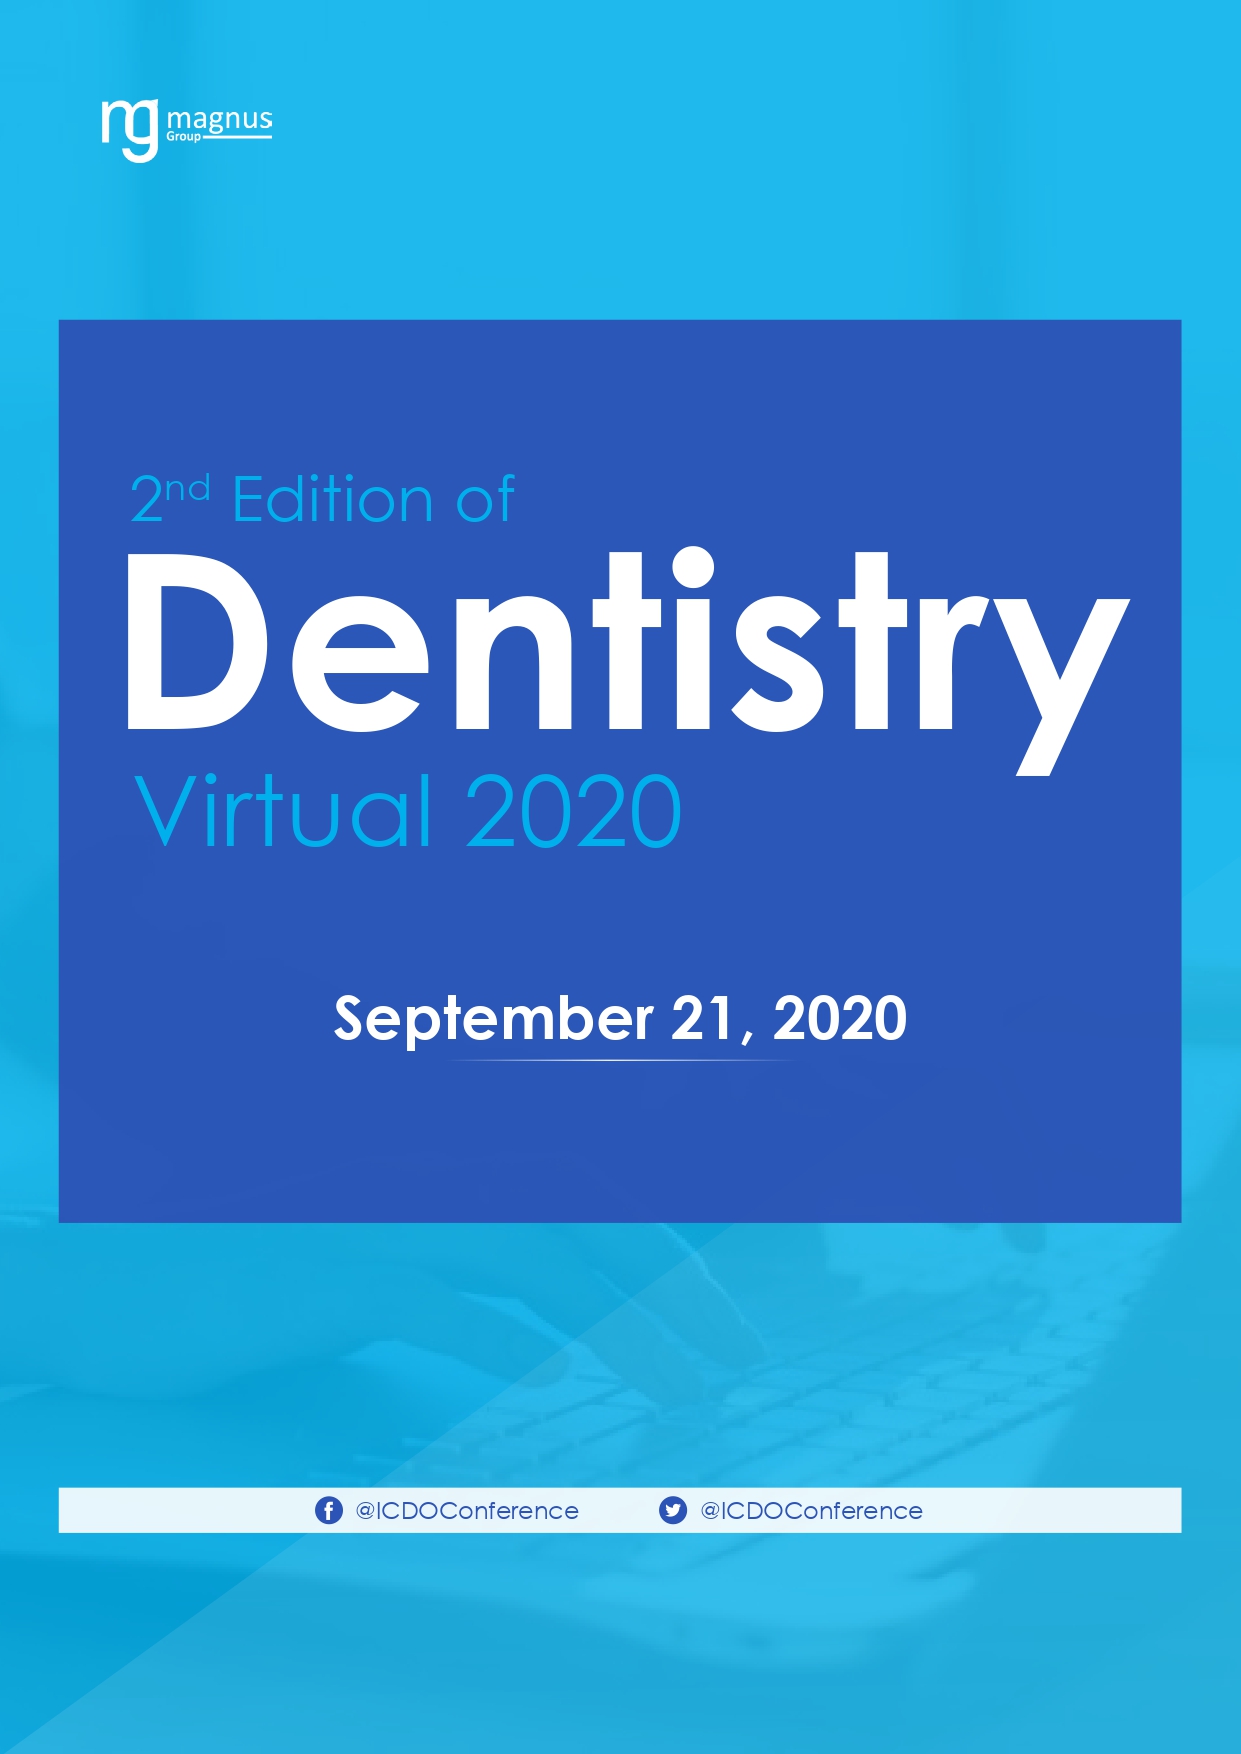 Dentistry Virtual 2020 | Online Event Event Book